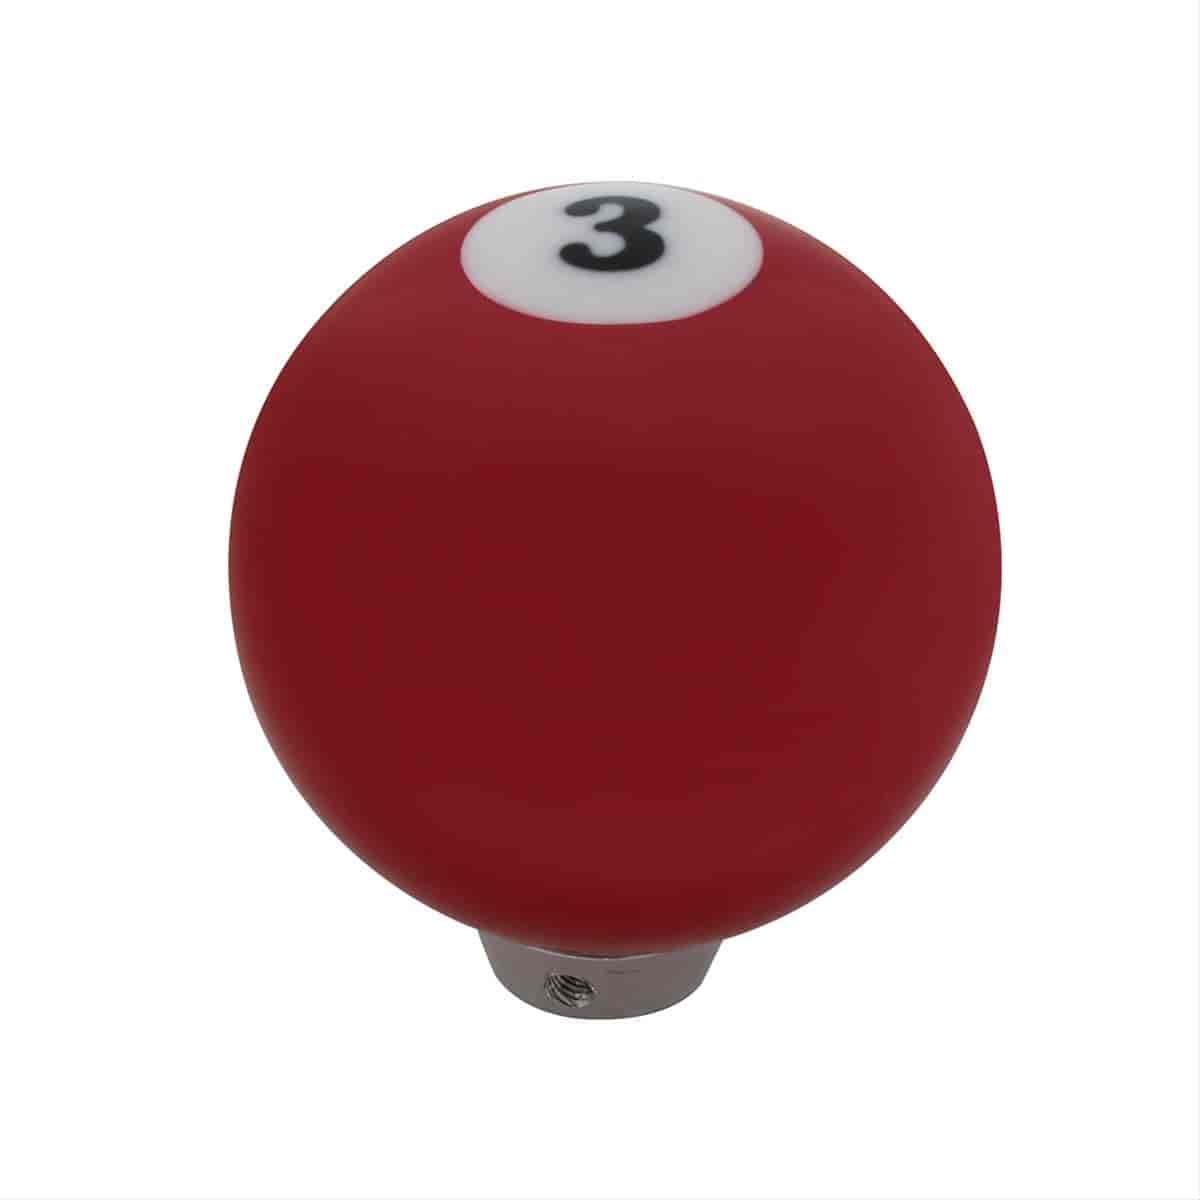 RED 3 BALL GEARSHIFT KNOB